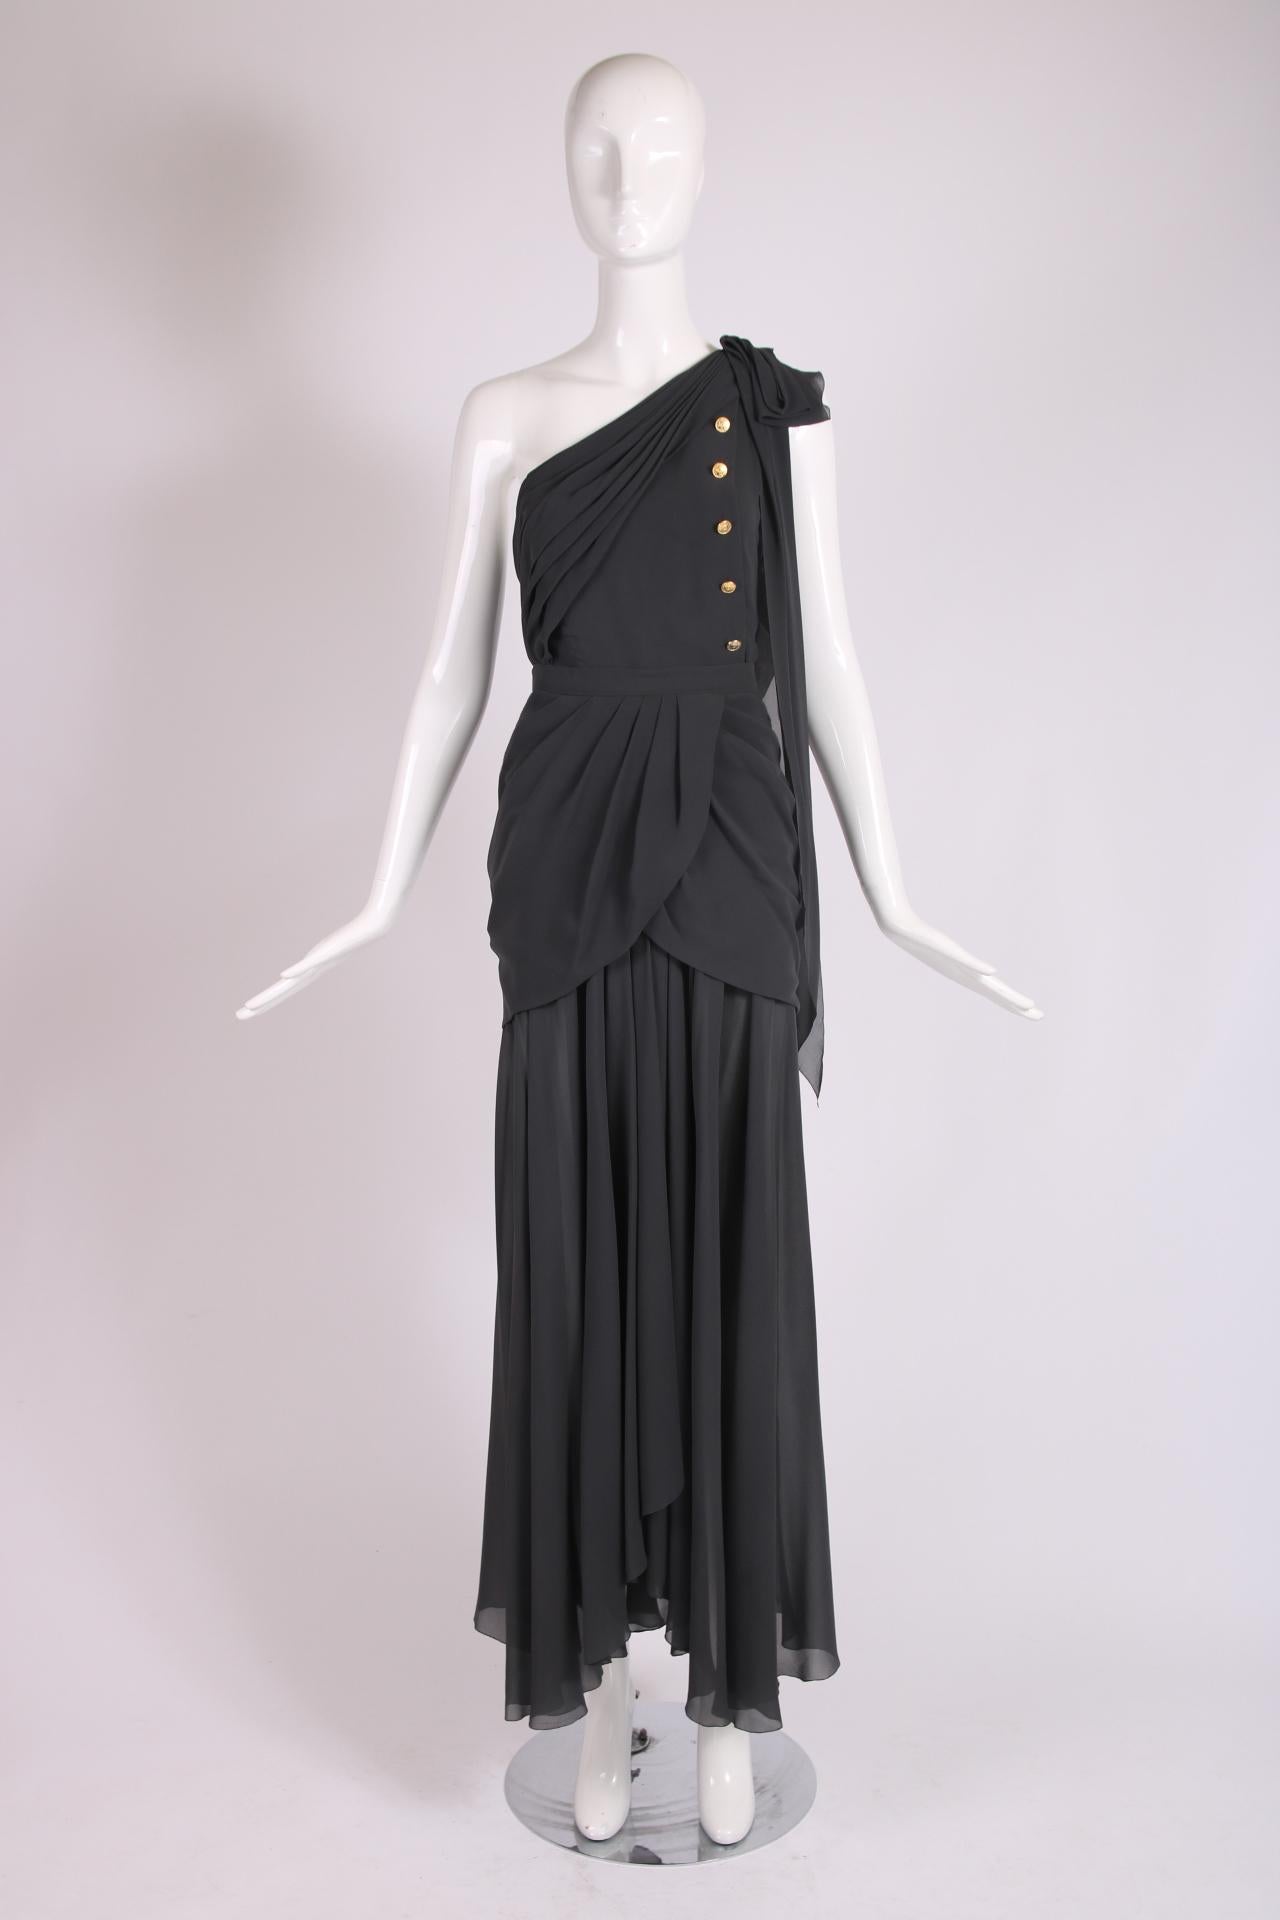 1989 Chanel slate gray, Grecian-inspired skirt and top ensemble with dramatic draping, a slit at center front and subtle hi-low hem. The bodice/top features design details such as diagonal ruching, a single long tie at shoulder left which drapes